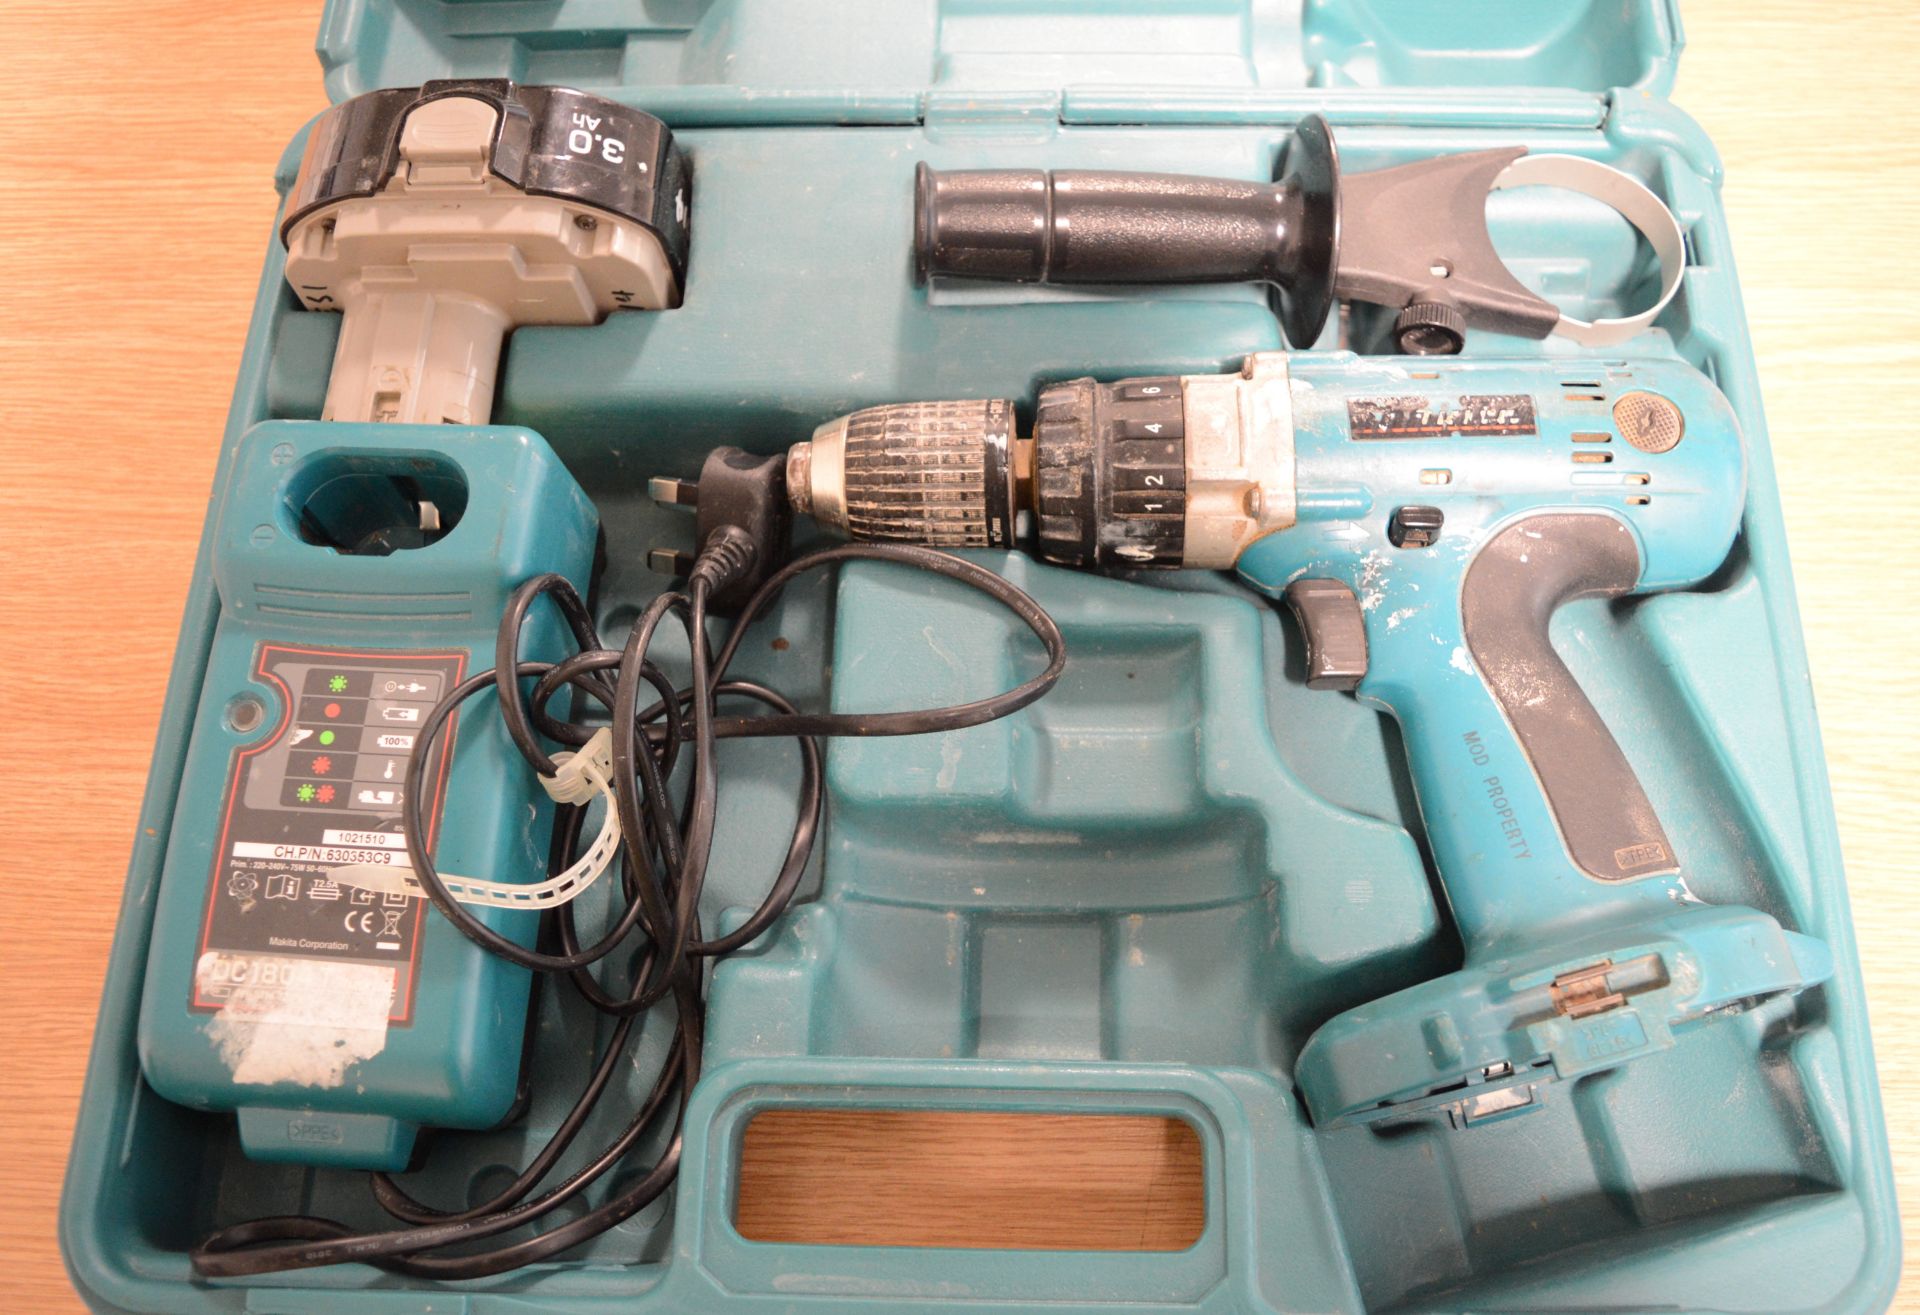 Makita Drill Portable 18V 1x Battery & Charger in a case - Thought not to be working. - Image 2 of 4